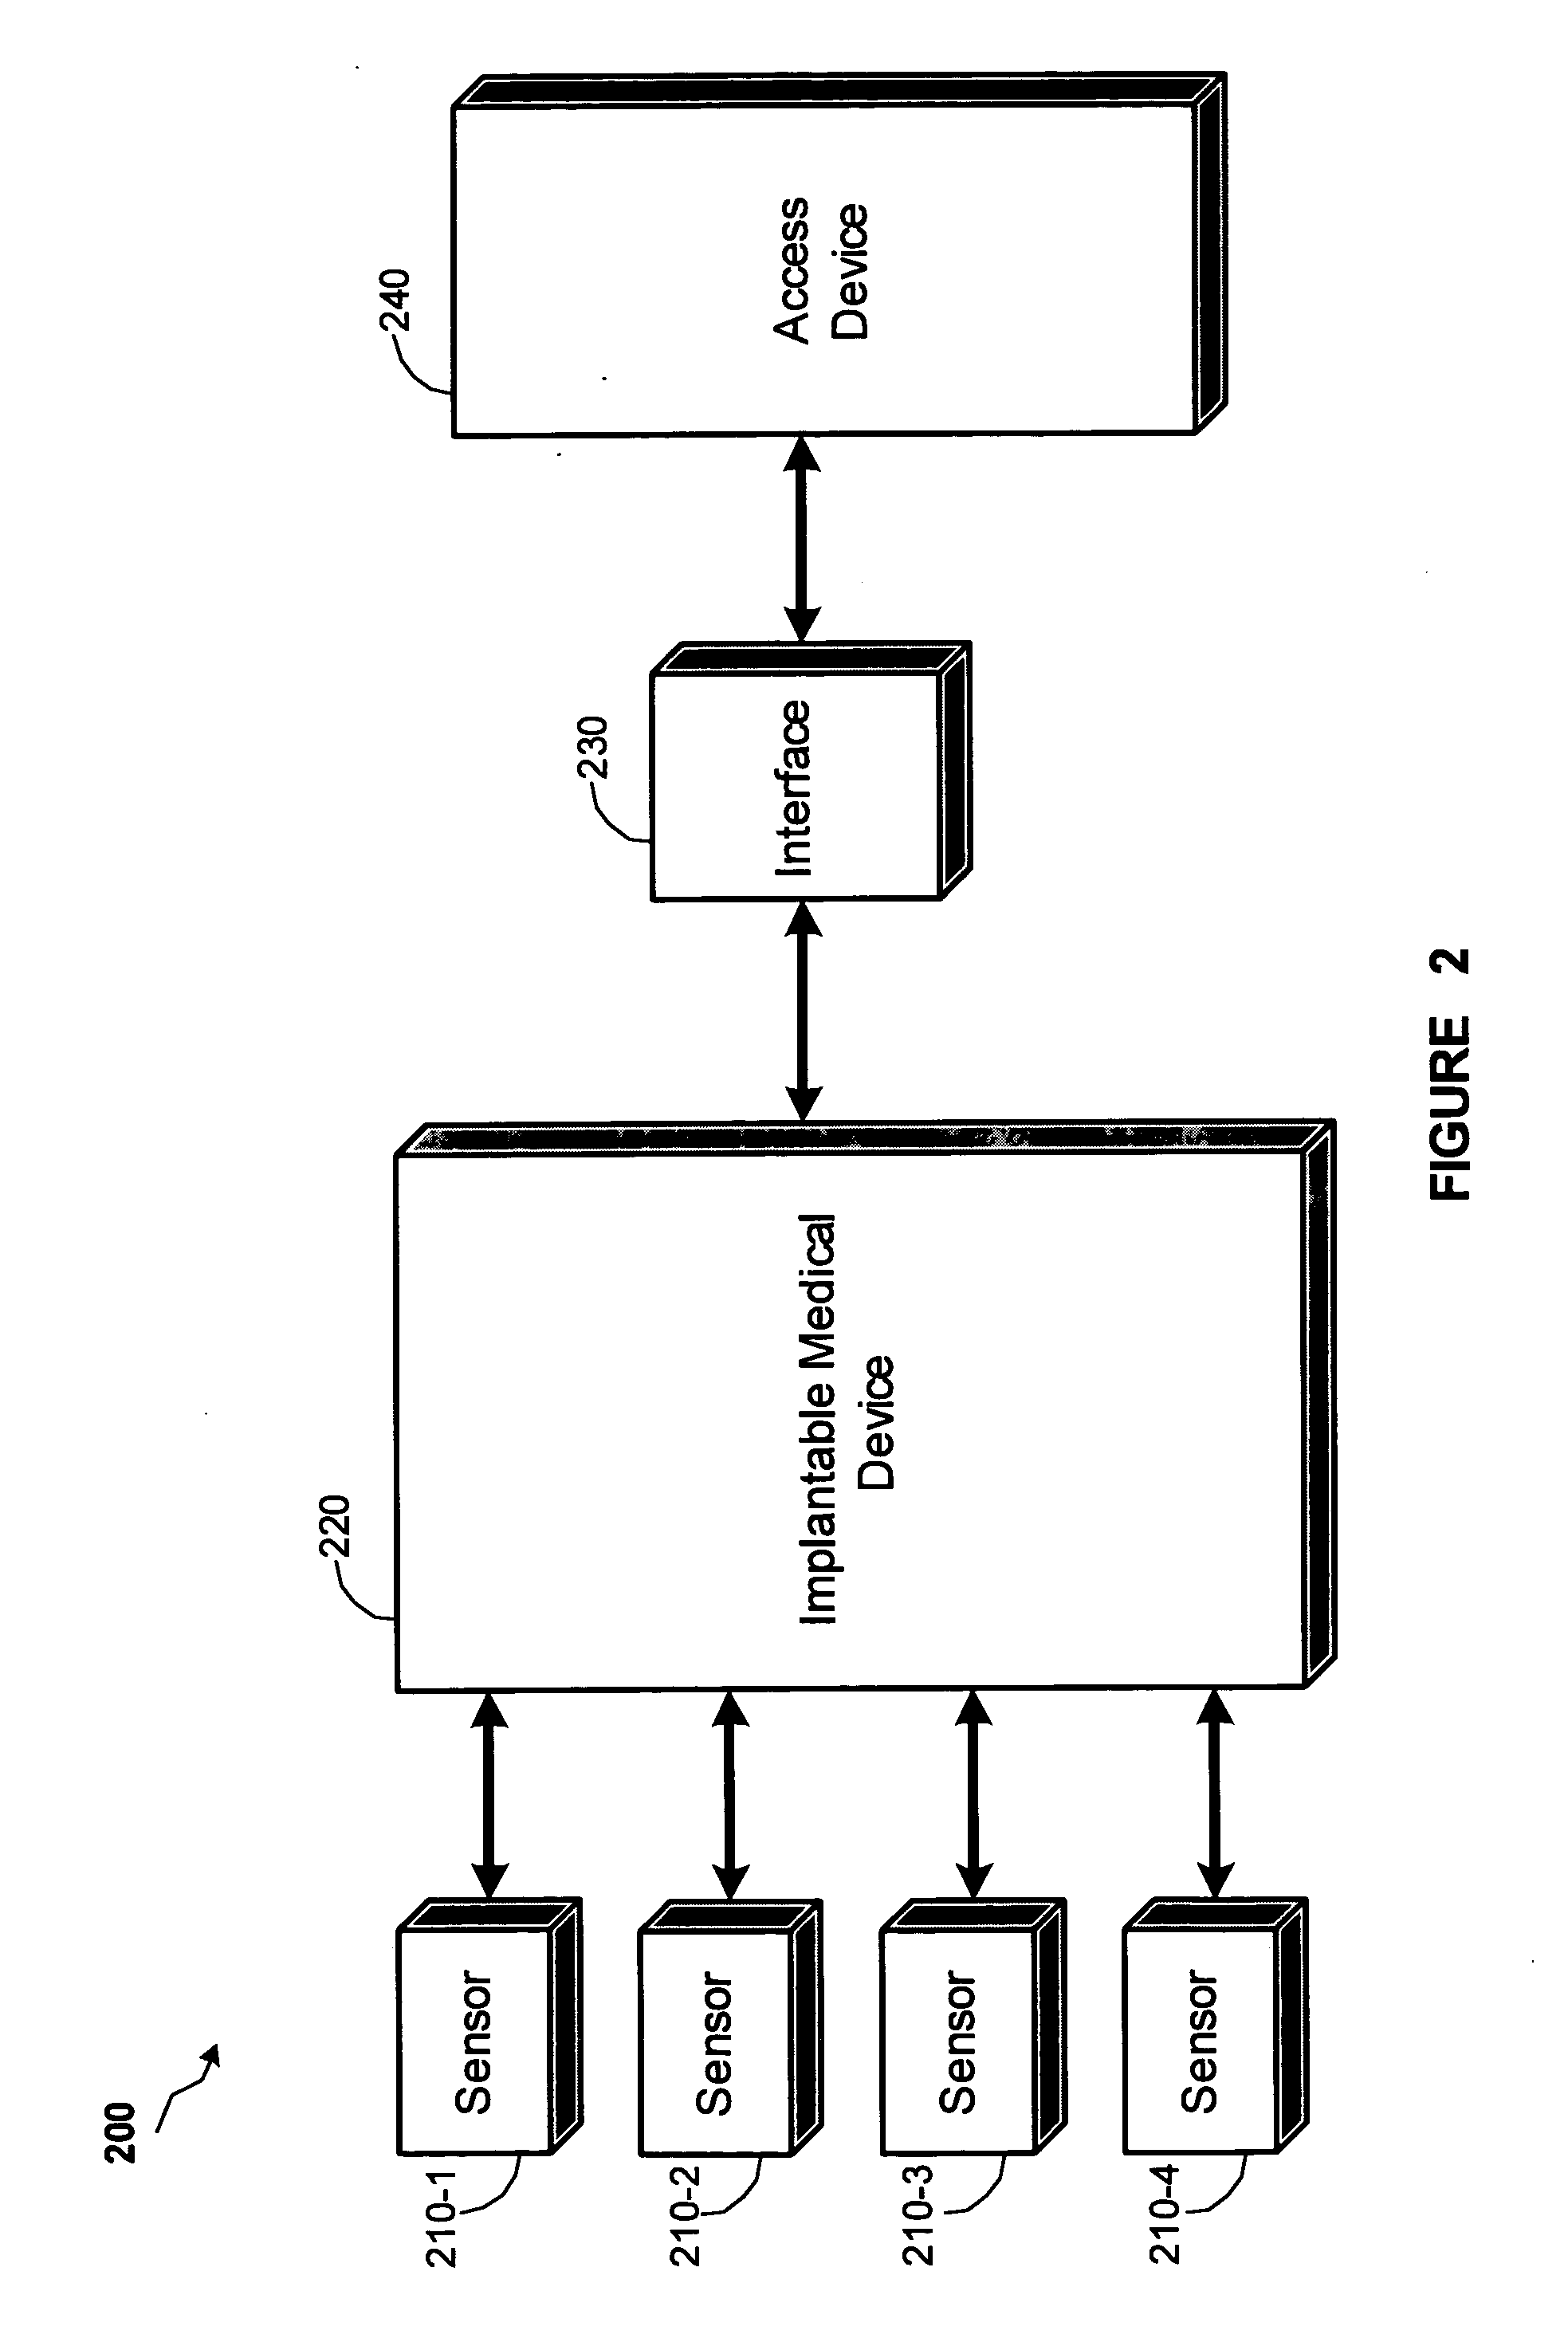 Method and apparatus to detect and monitor the frequency of obstructive sleep apnea